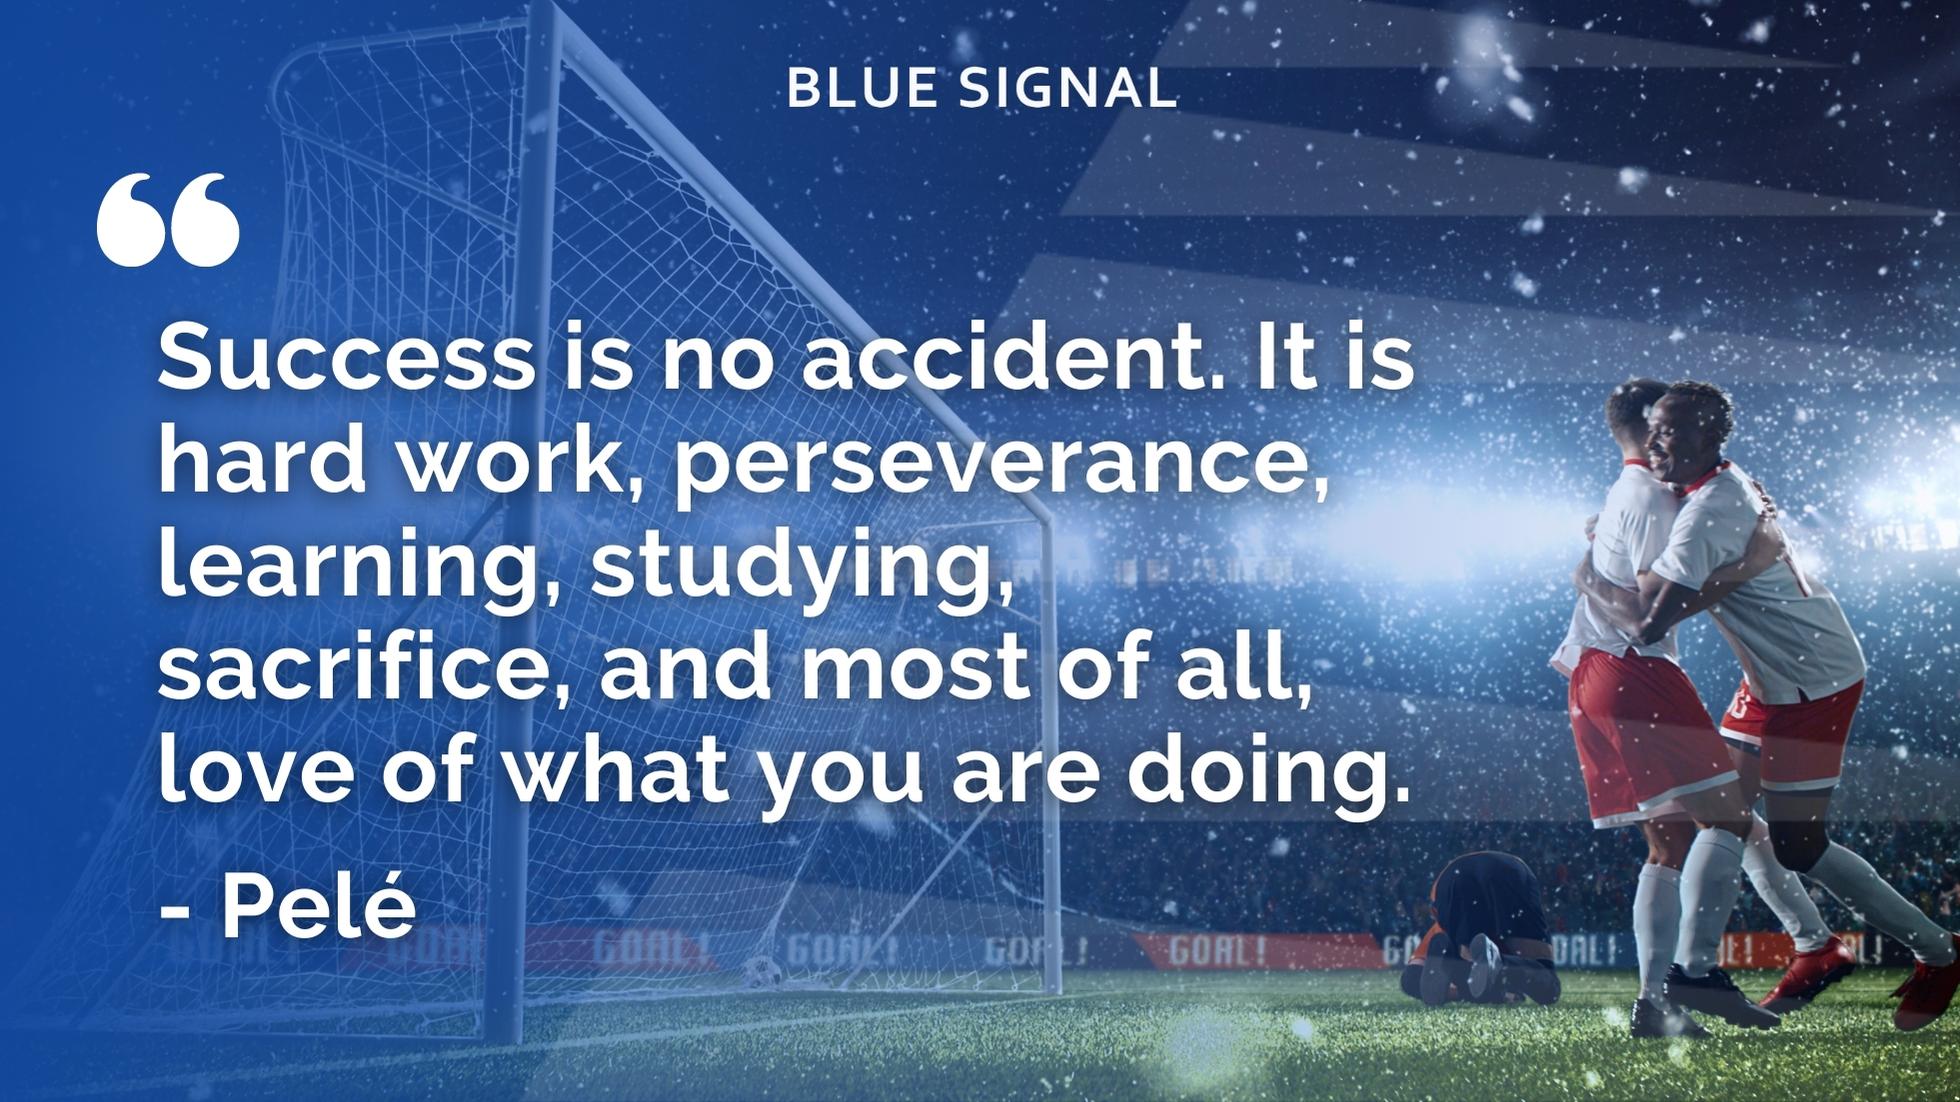 quote from Pele displayed on a blue gradient over a soccer field with 2 players celebrating a win. The quote reads, "Success is no accident. It is hard work, preservation, learning, studying, sacrifice, and most of all, love of what you are doing."